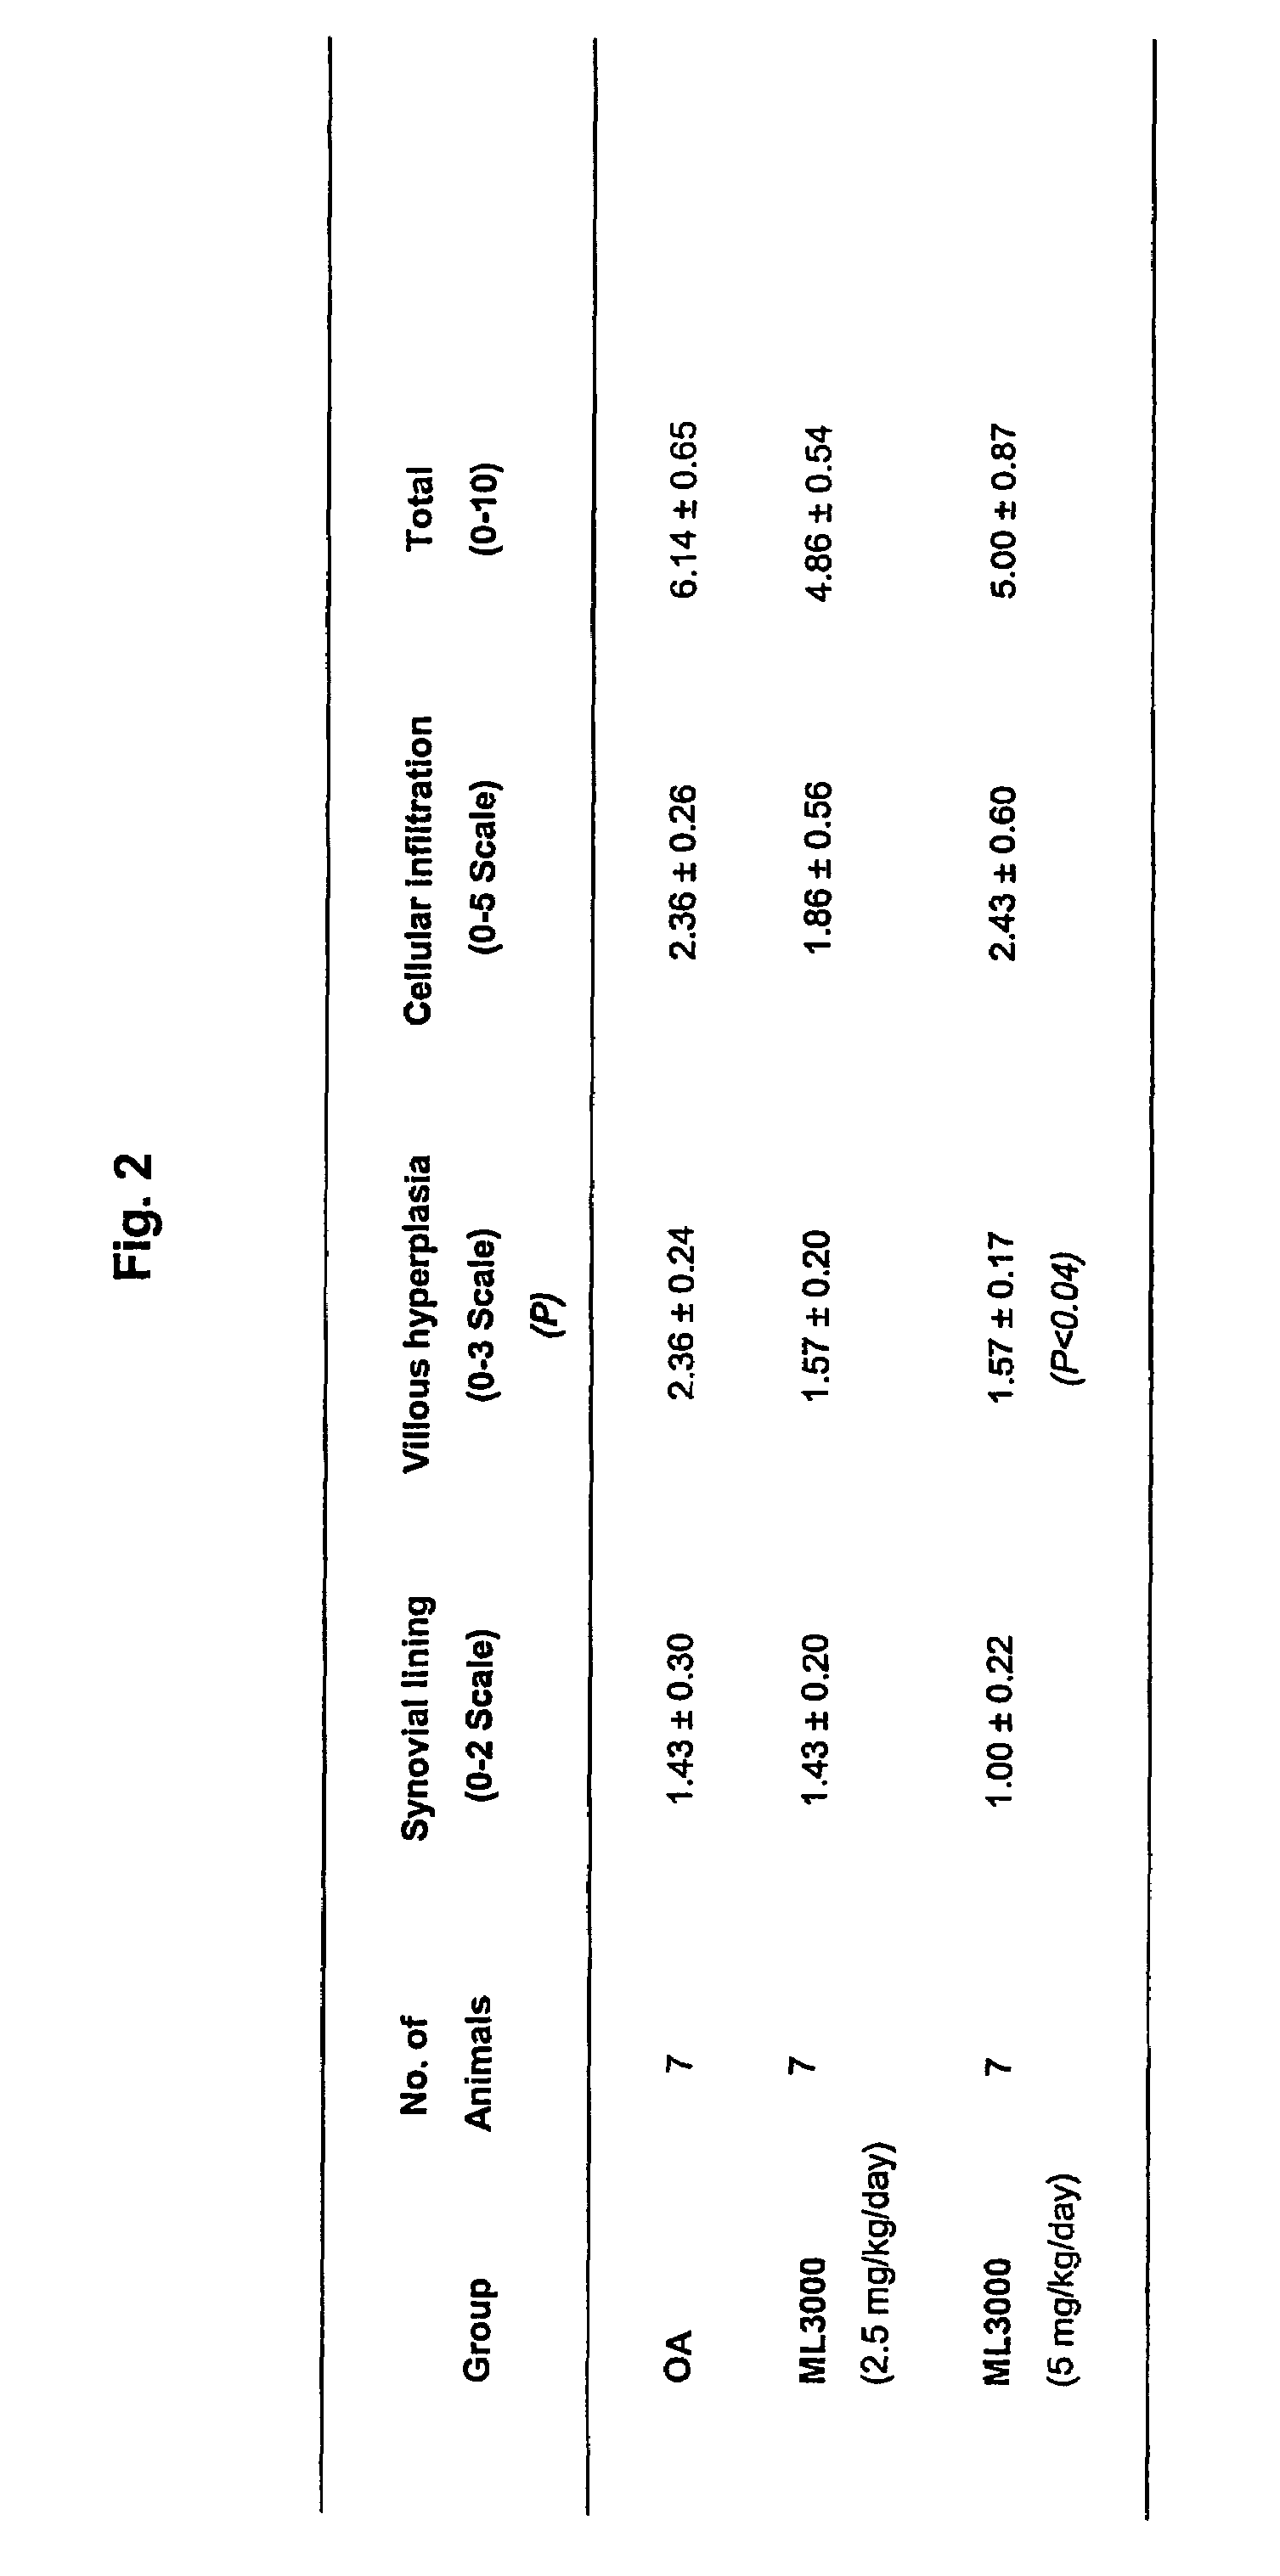 Use of annellated pyrrole compounds in the treatment of articular cartilage or subchondral bone degeneration